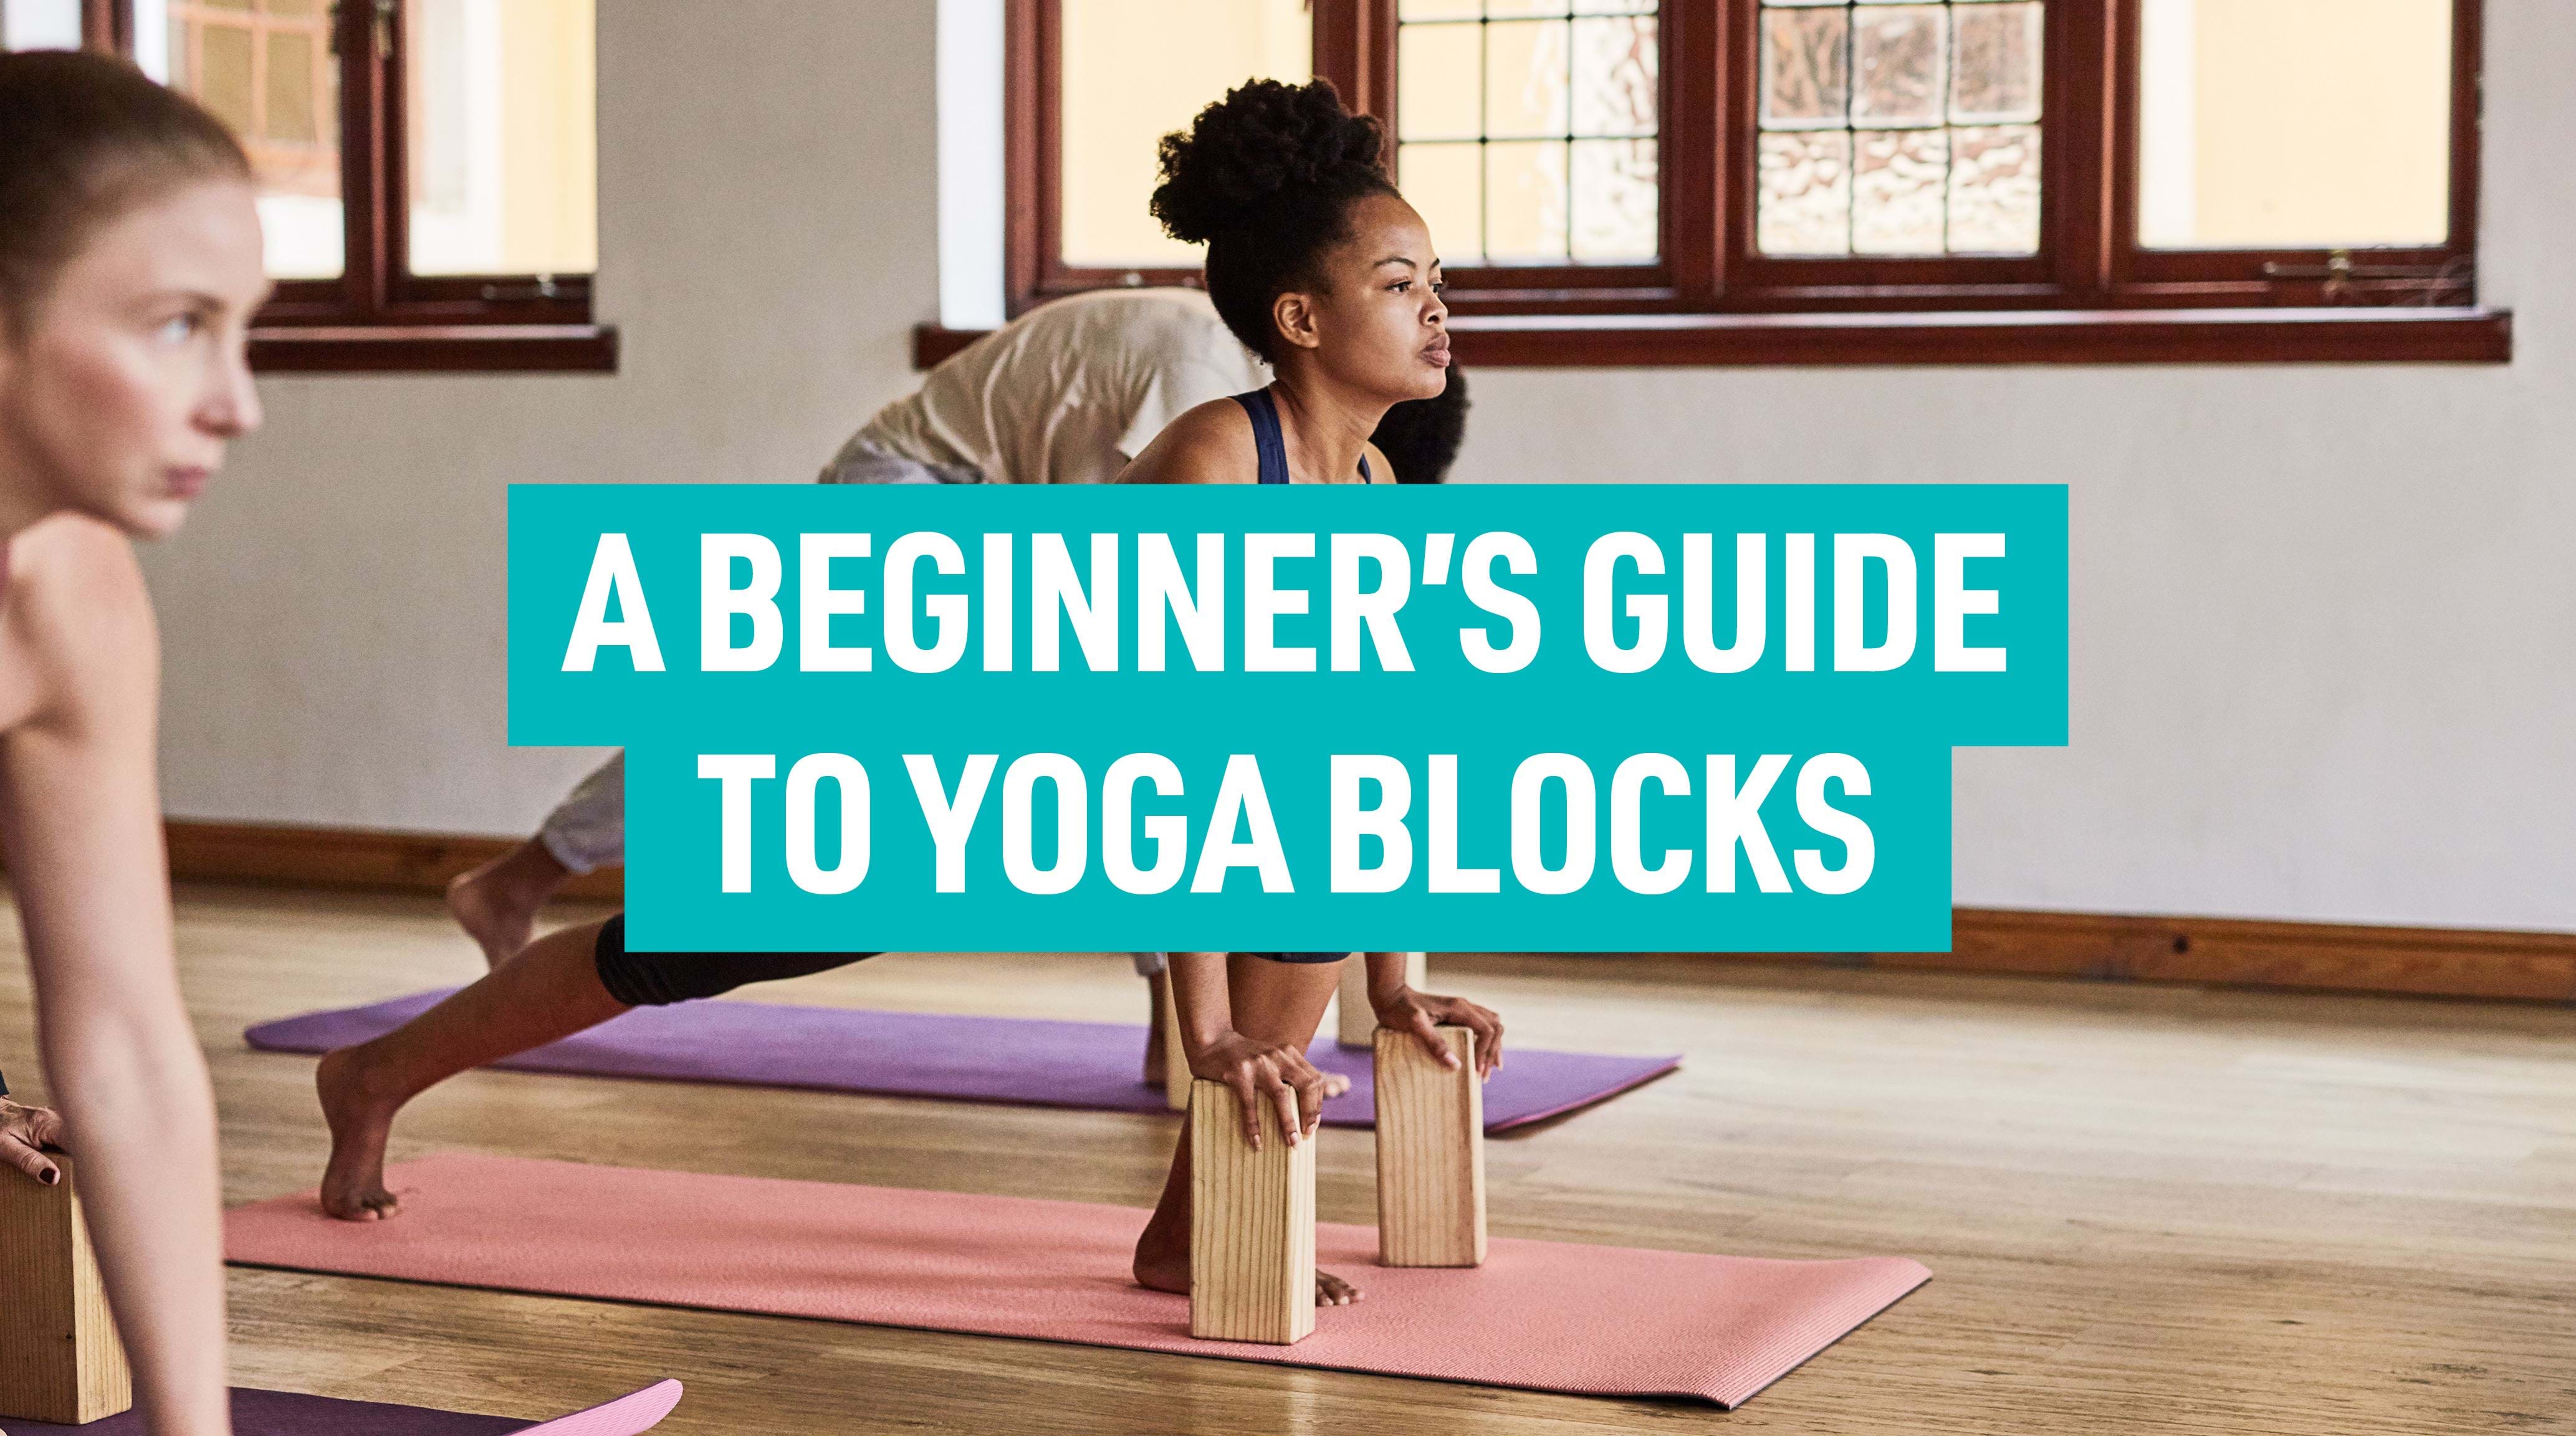 Beginners guide to easy yoga poses, shoulder